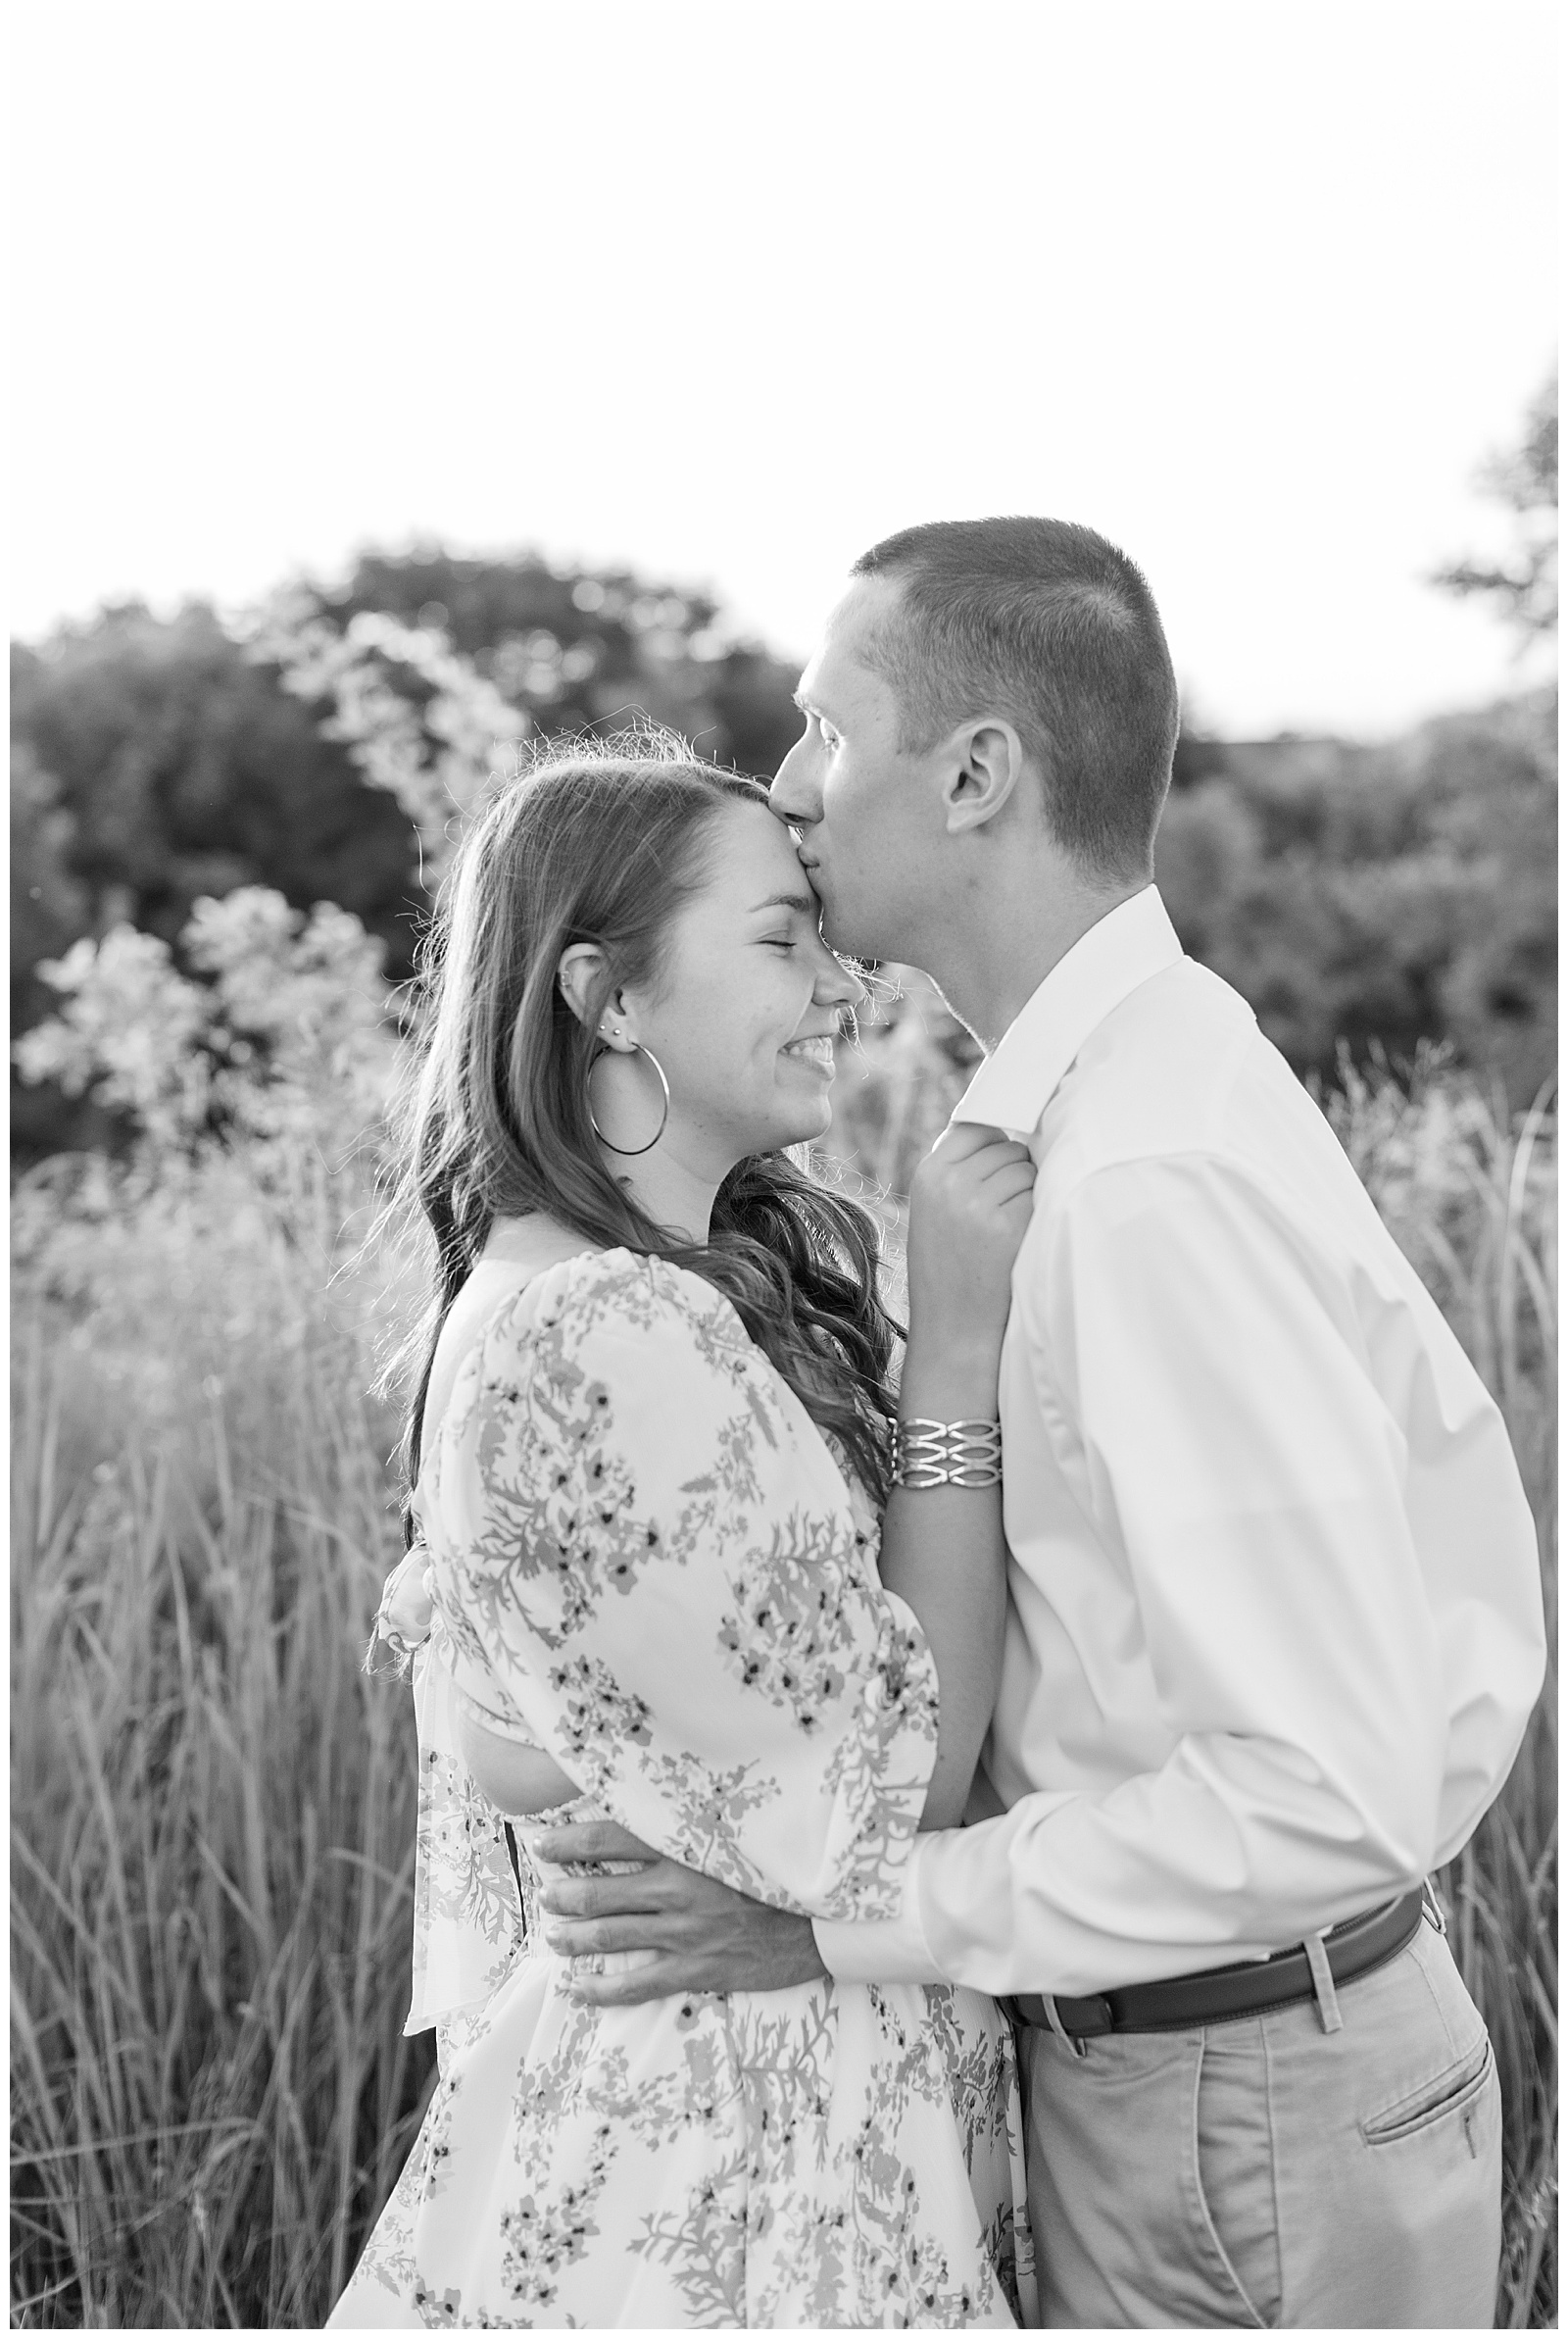 black and white photo of guy kissing girl on her forehead by tall wild grasses at overlook park